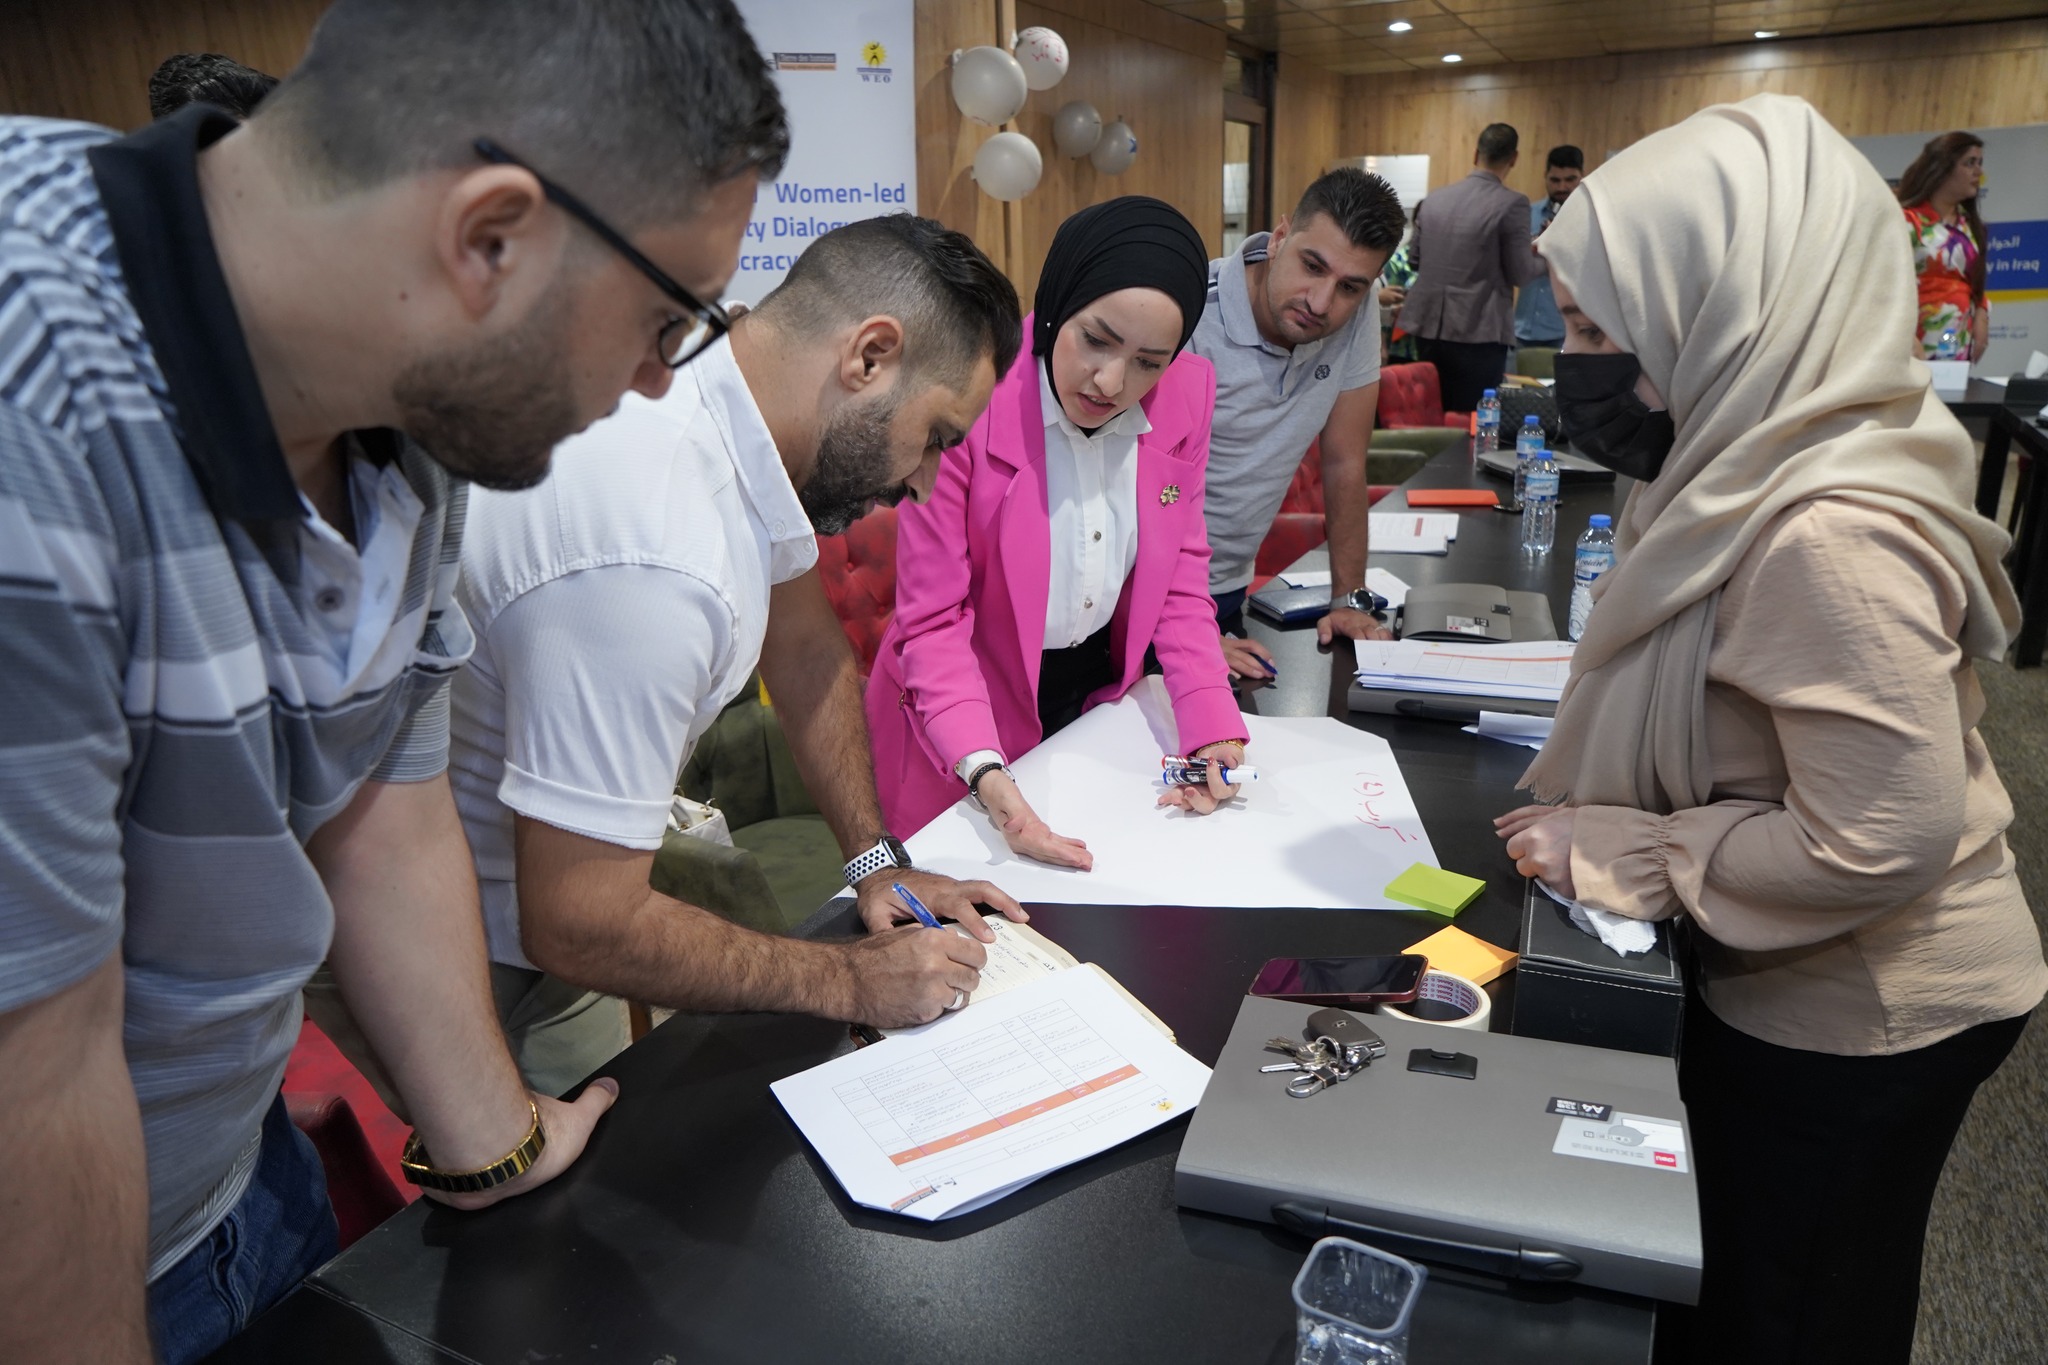 Youth and Women-led Community Dialogue for Democracy in Iraq